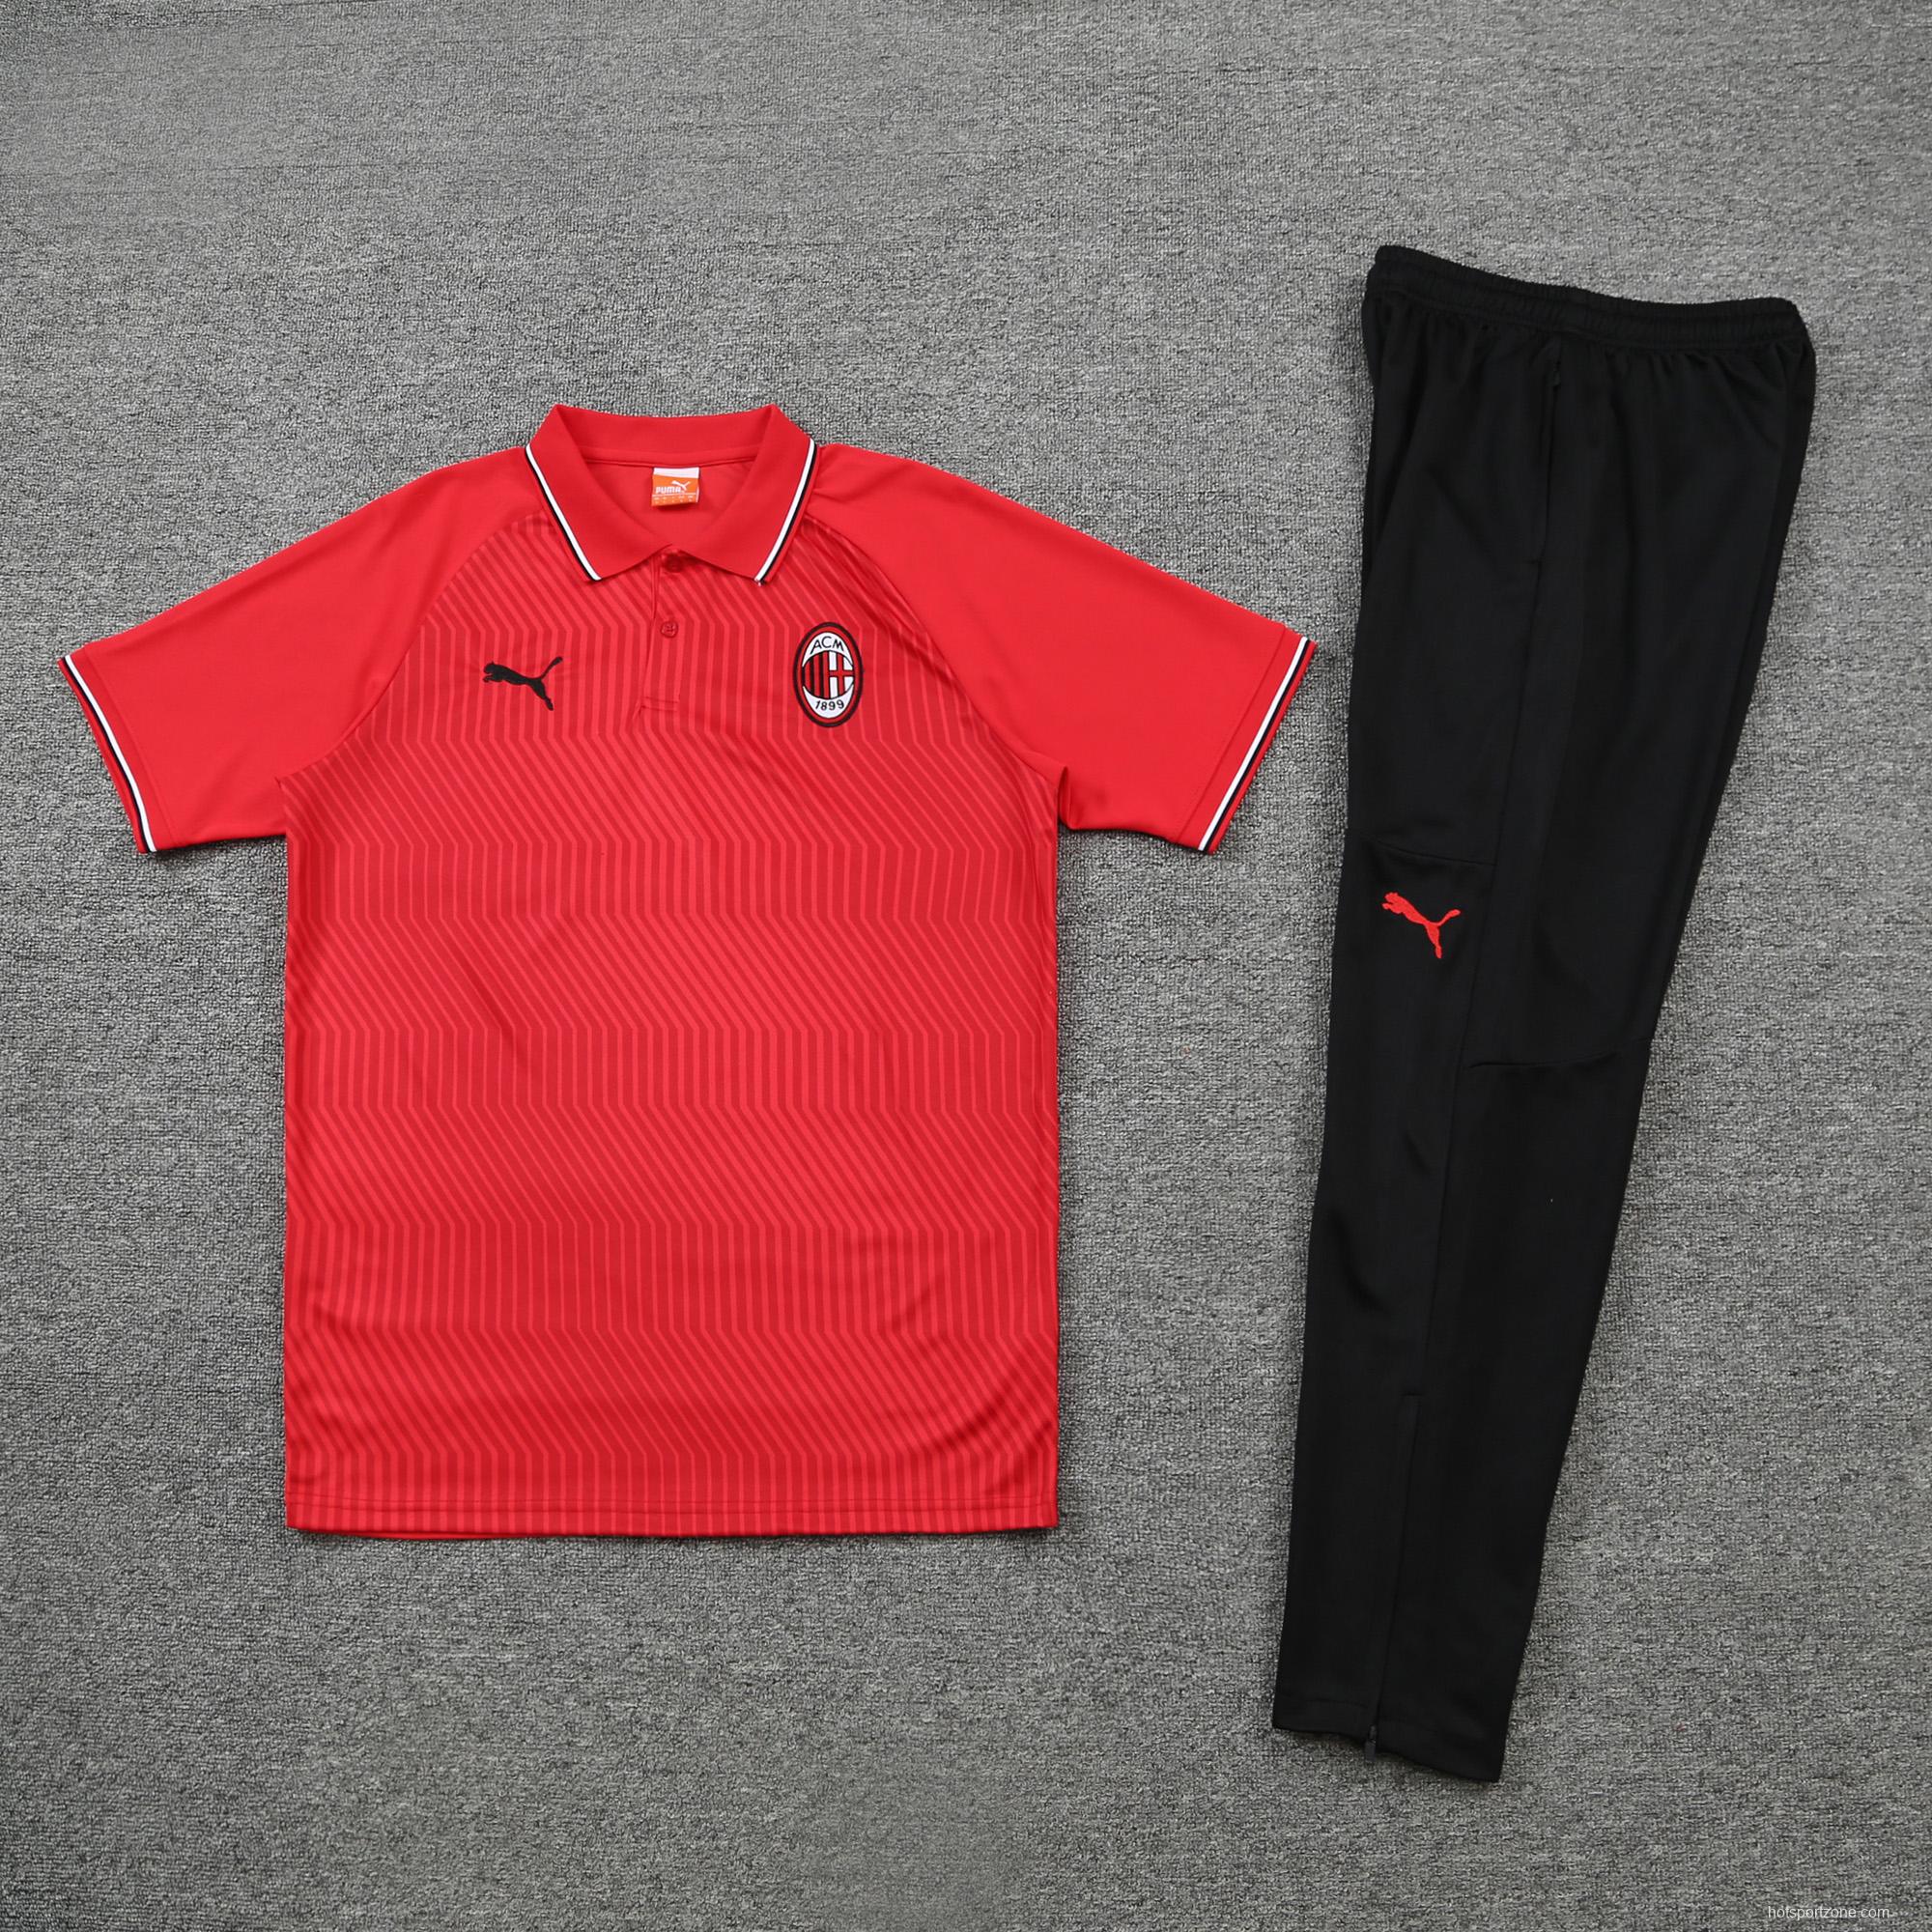 A.C. Milan POLO kit Red (not supported to be sold separately)